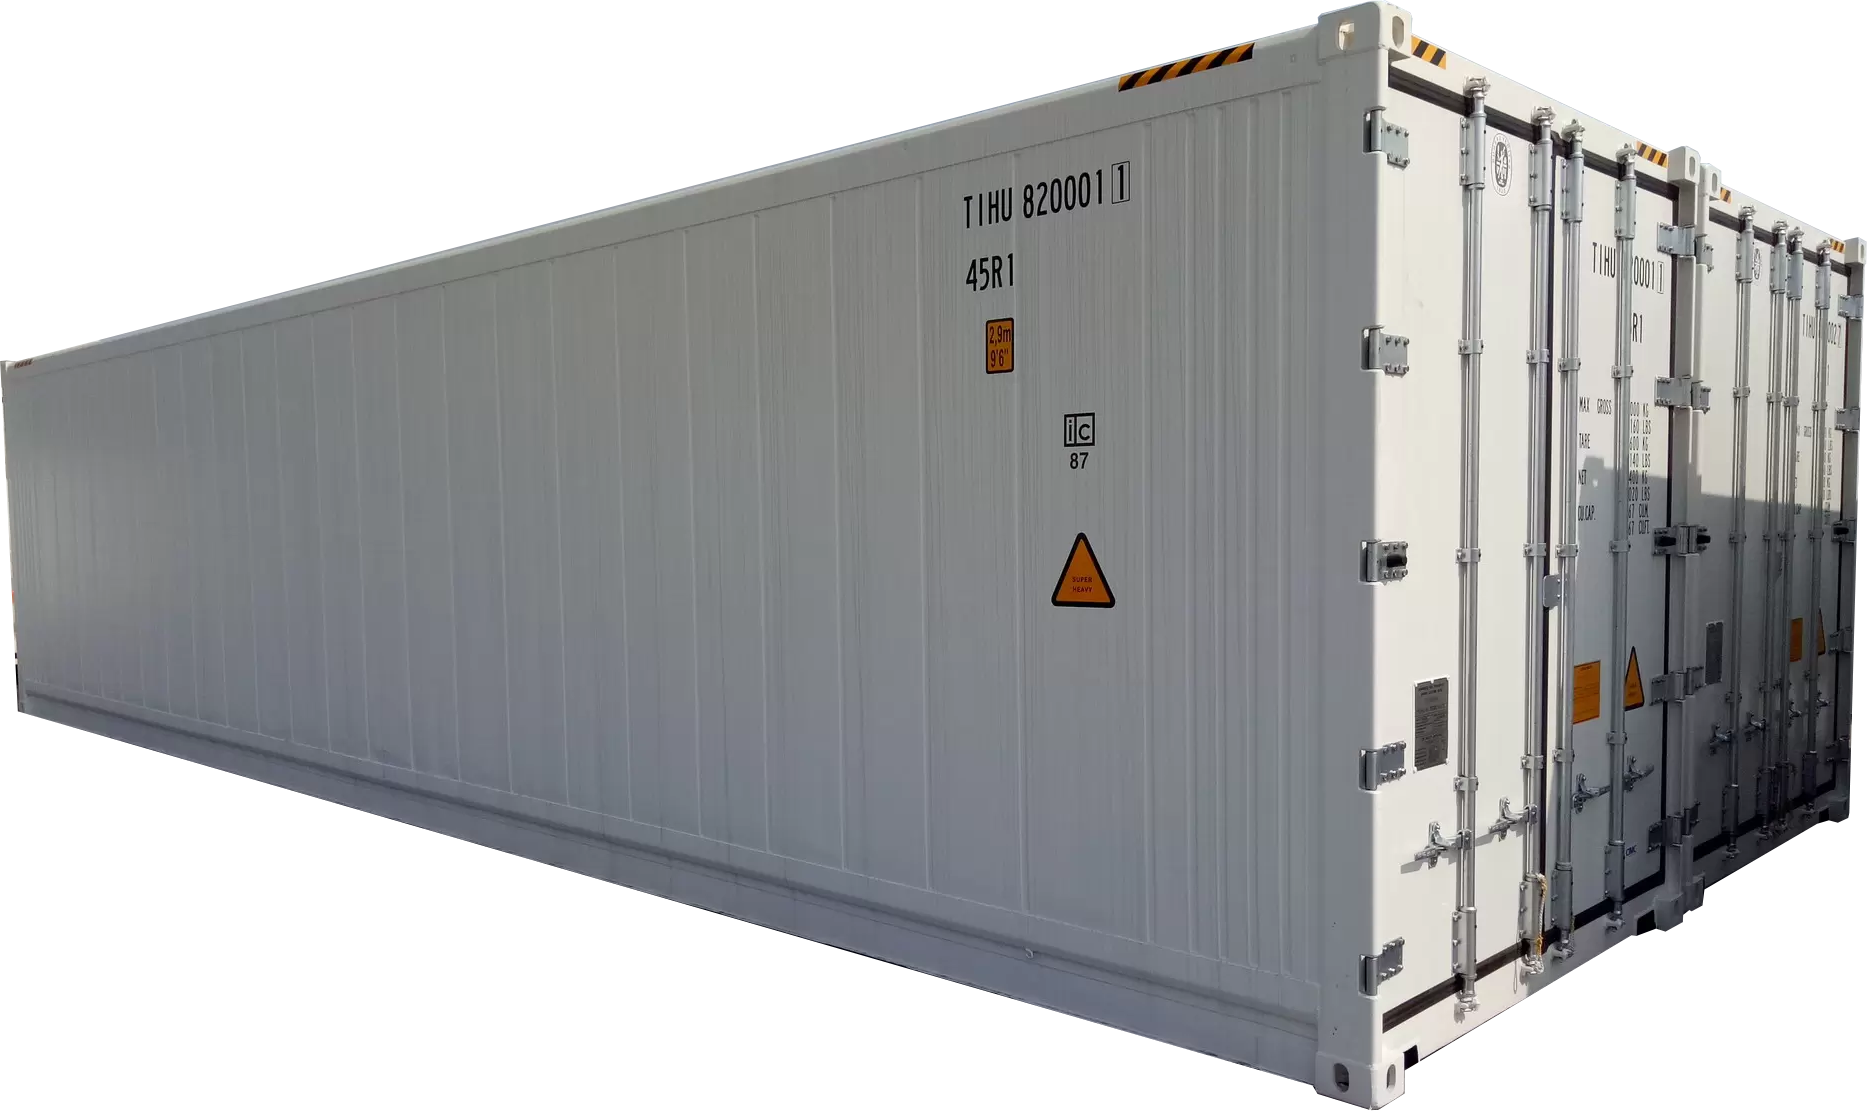 40 High Cube Refrigerated Containers